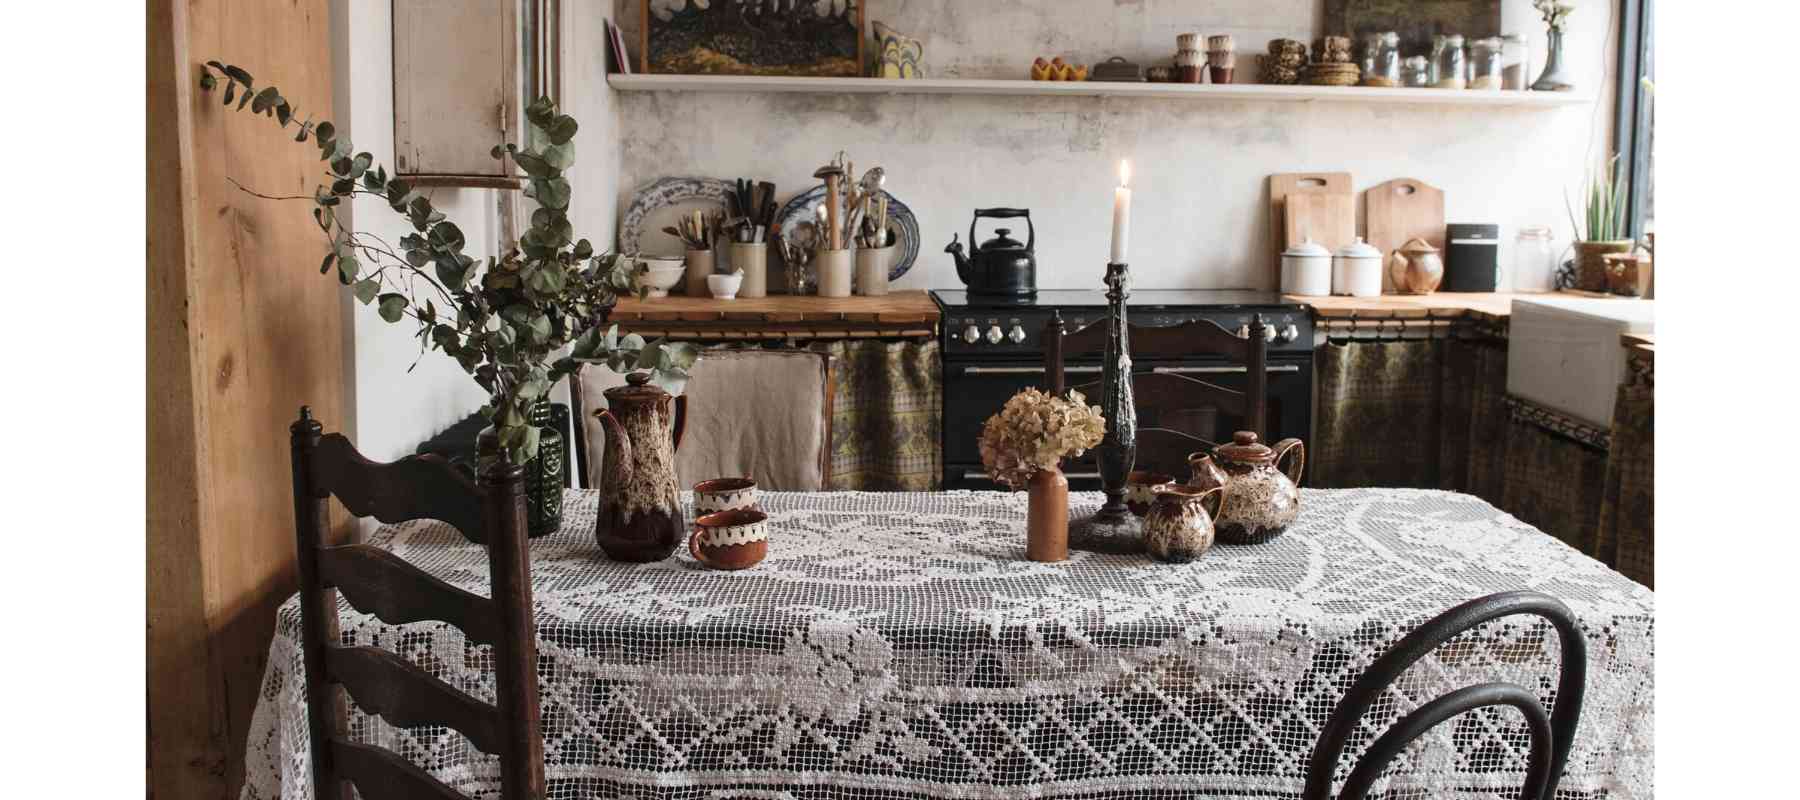 Wooden kitchen table with lace tablecloth